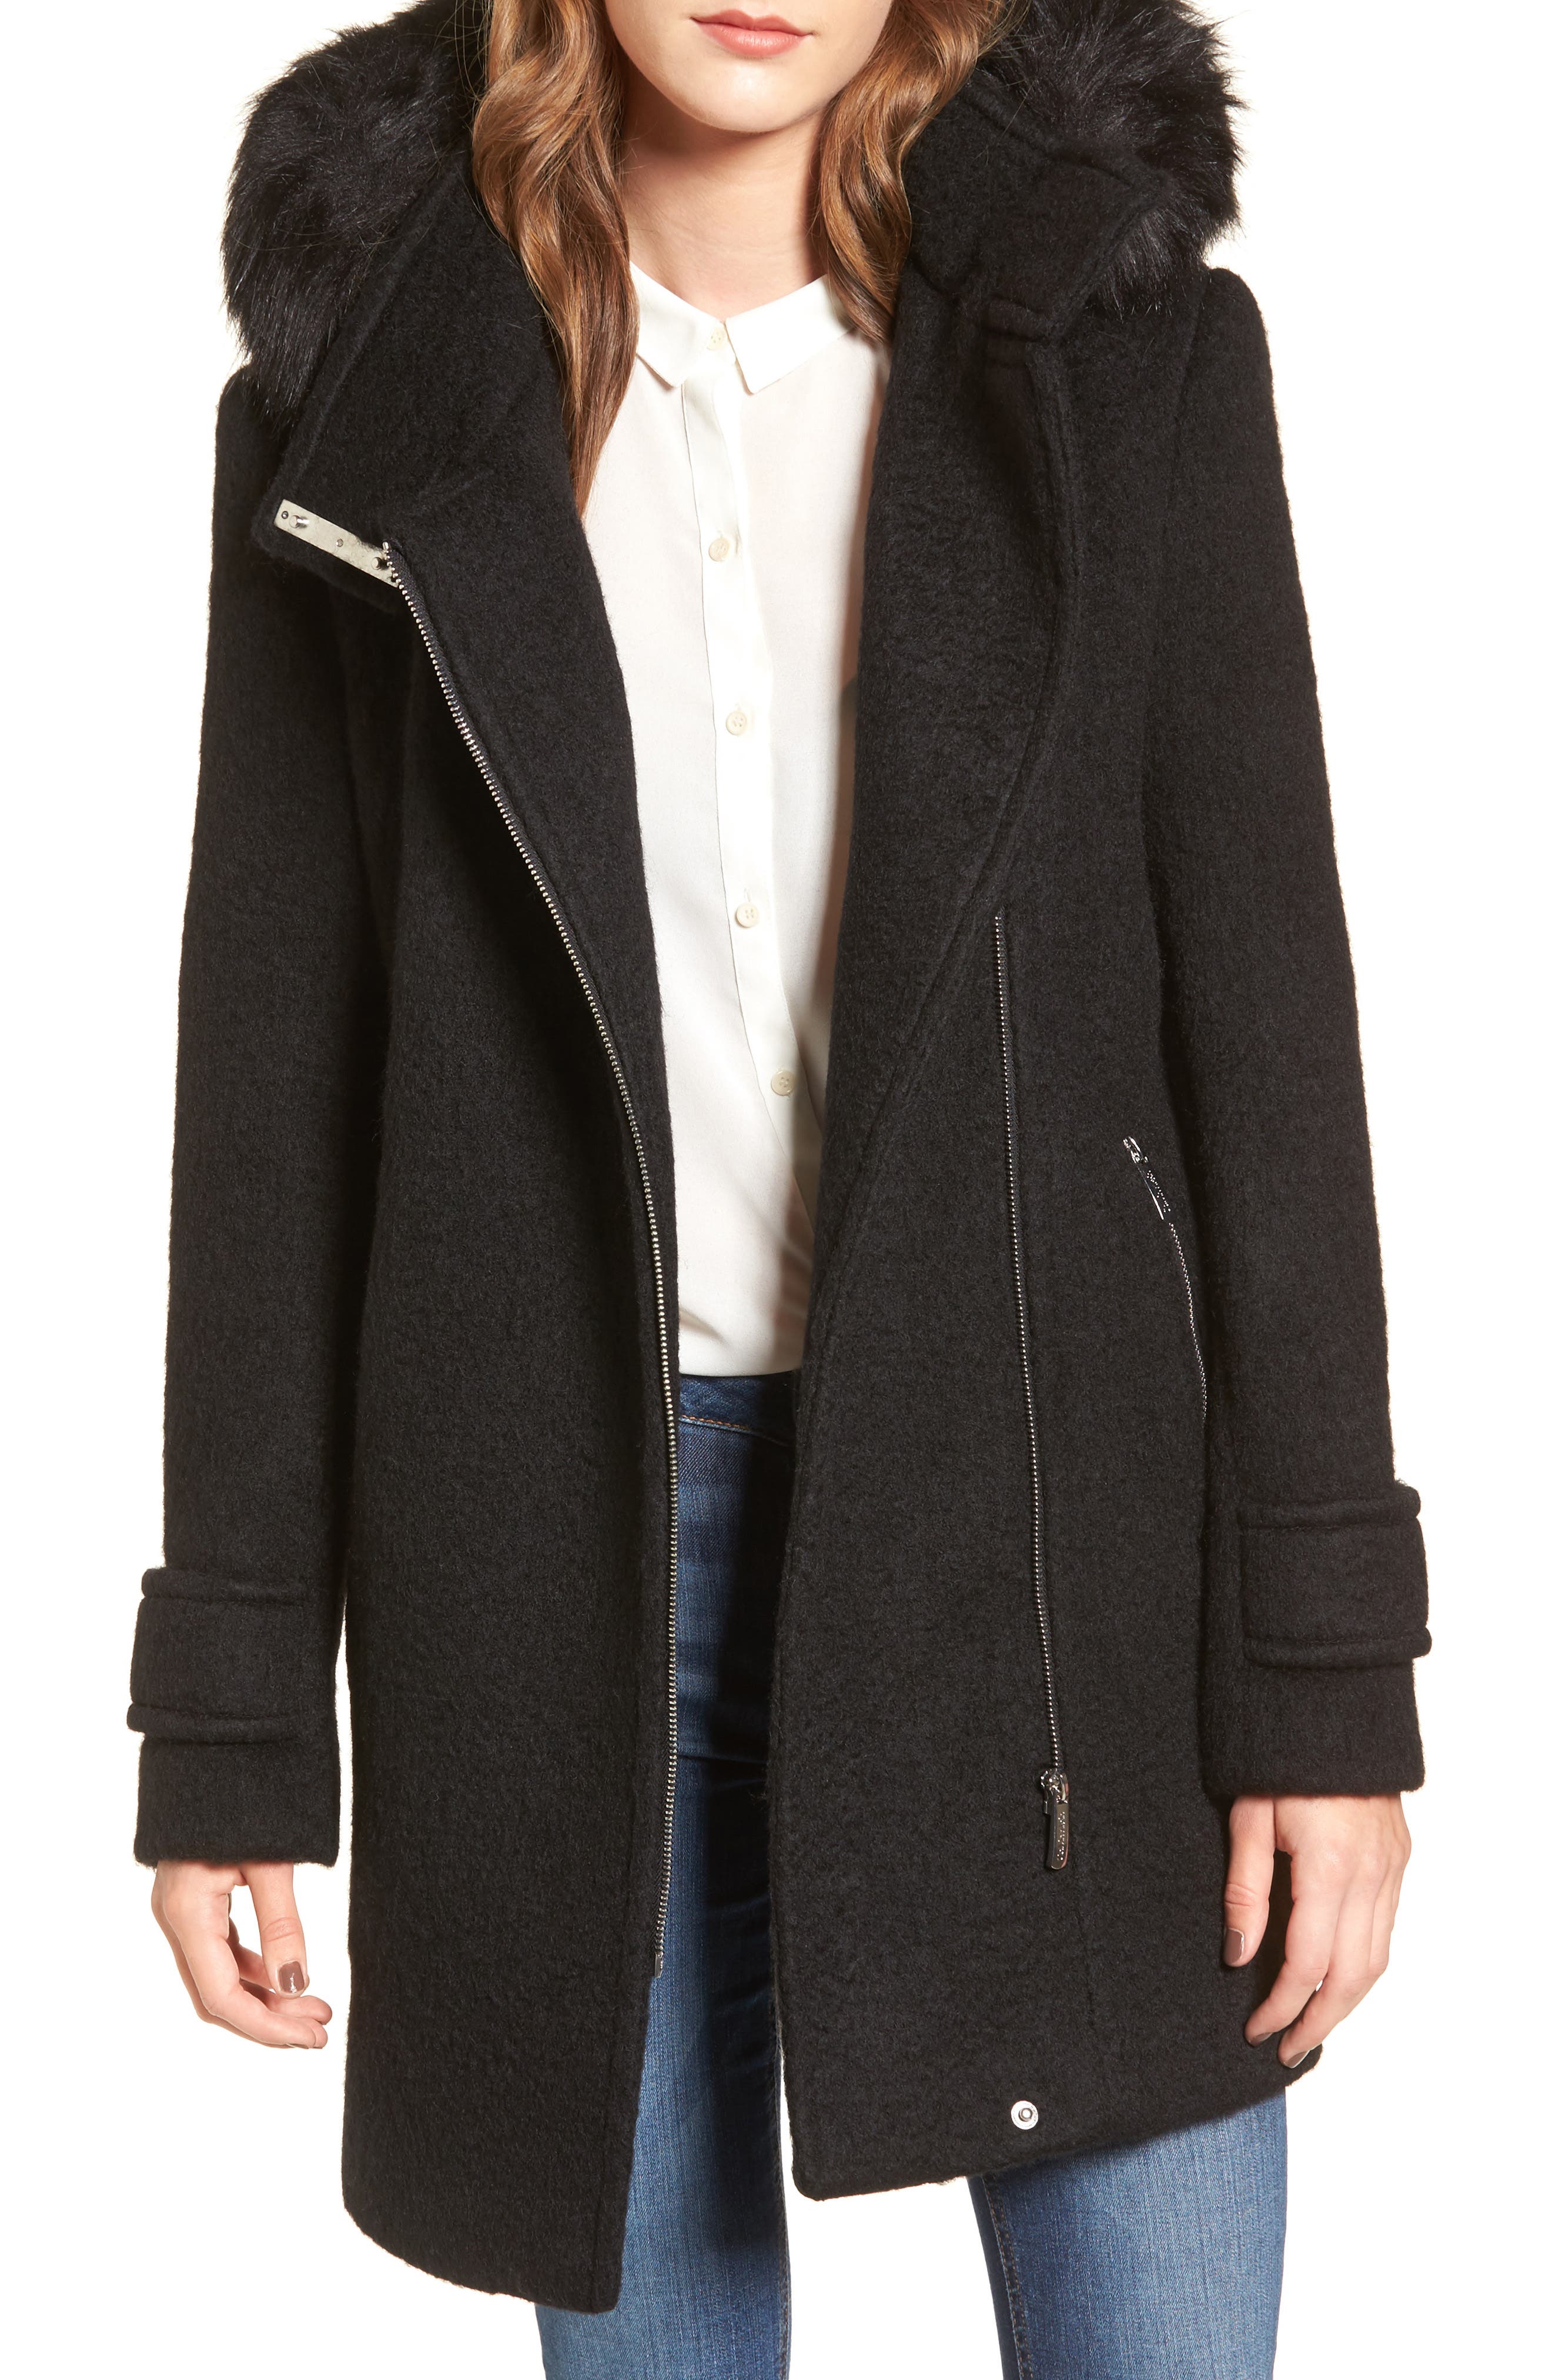 schott padded jacket with hood lining and faux fur collar